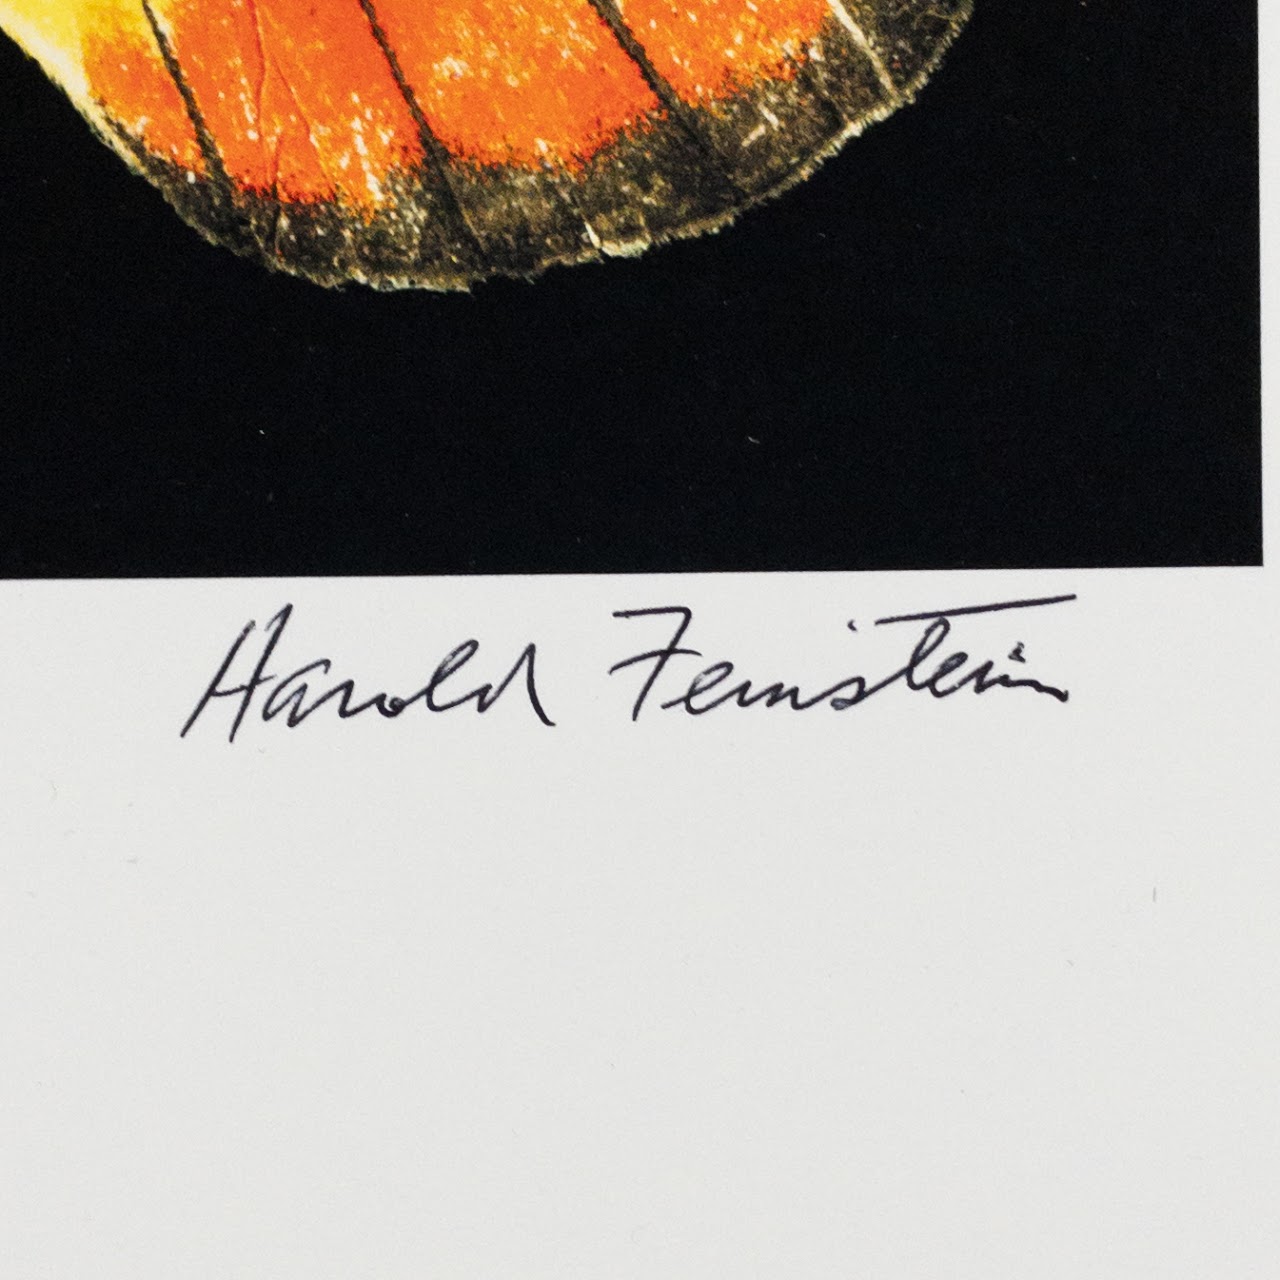 Harold Feinstein Butterfly Color Scanograph Duo